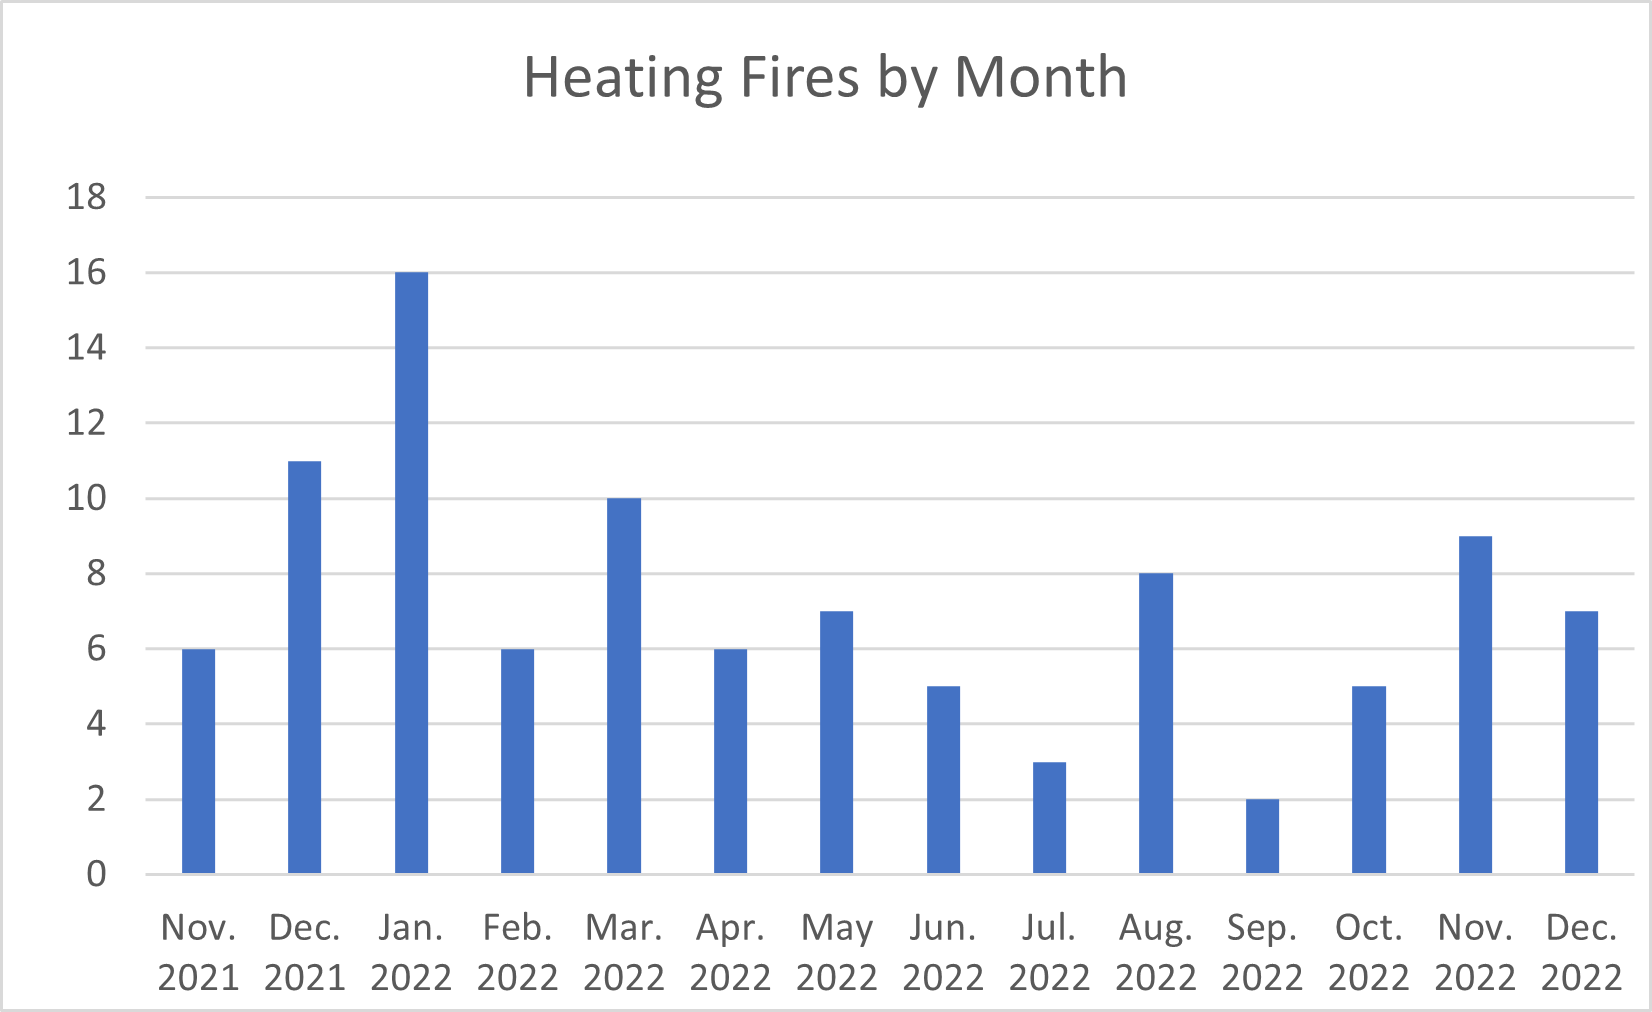 A chart showing heating fires by month.